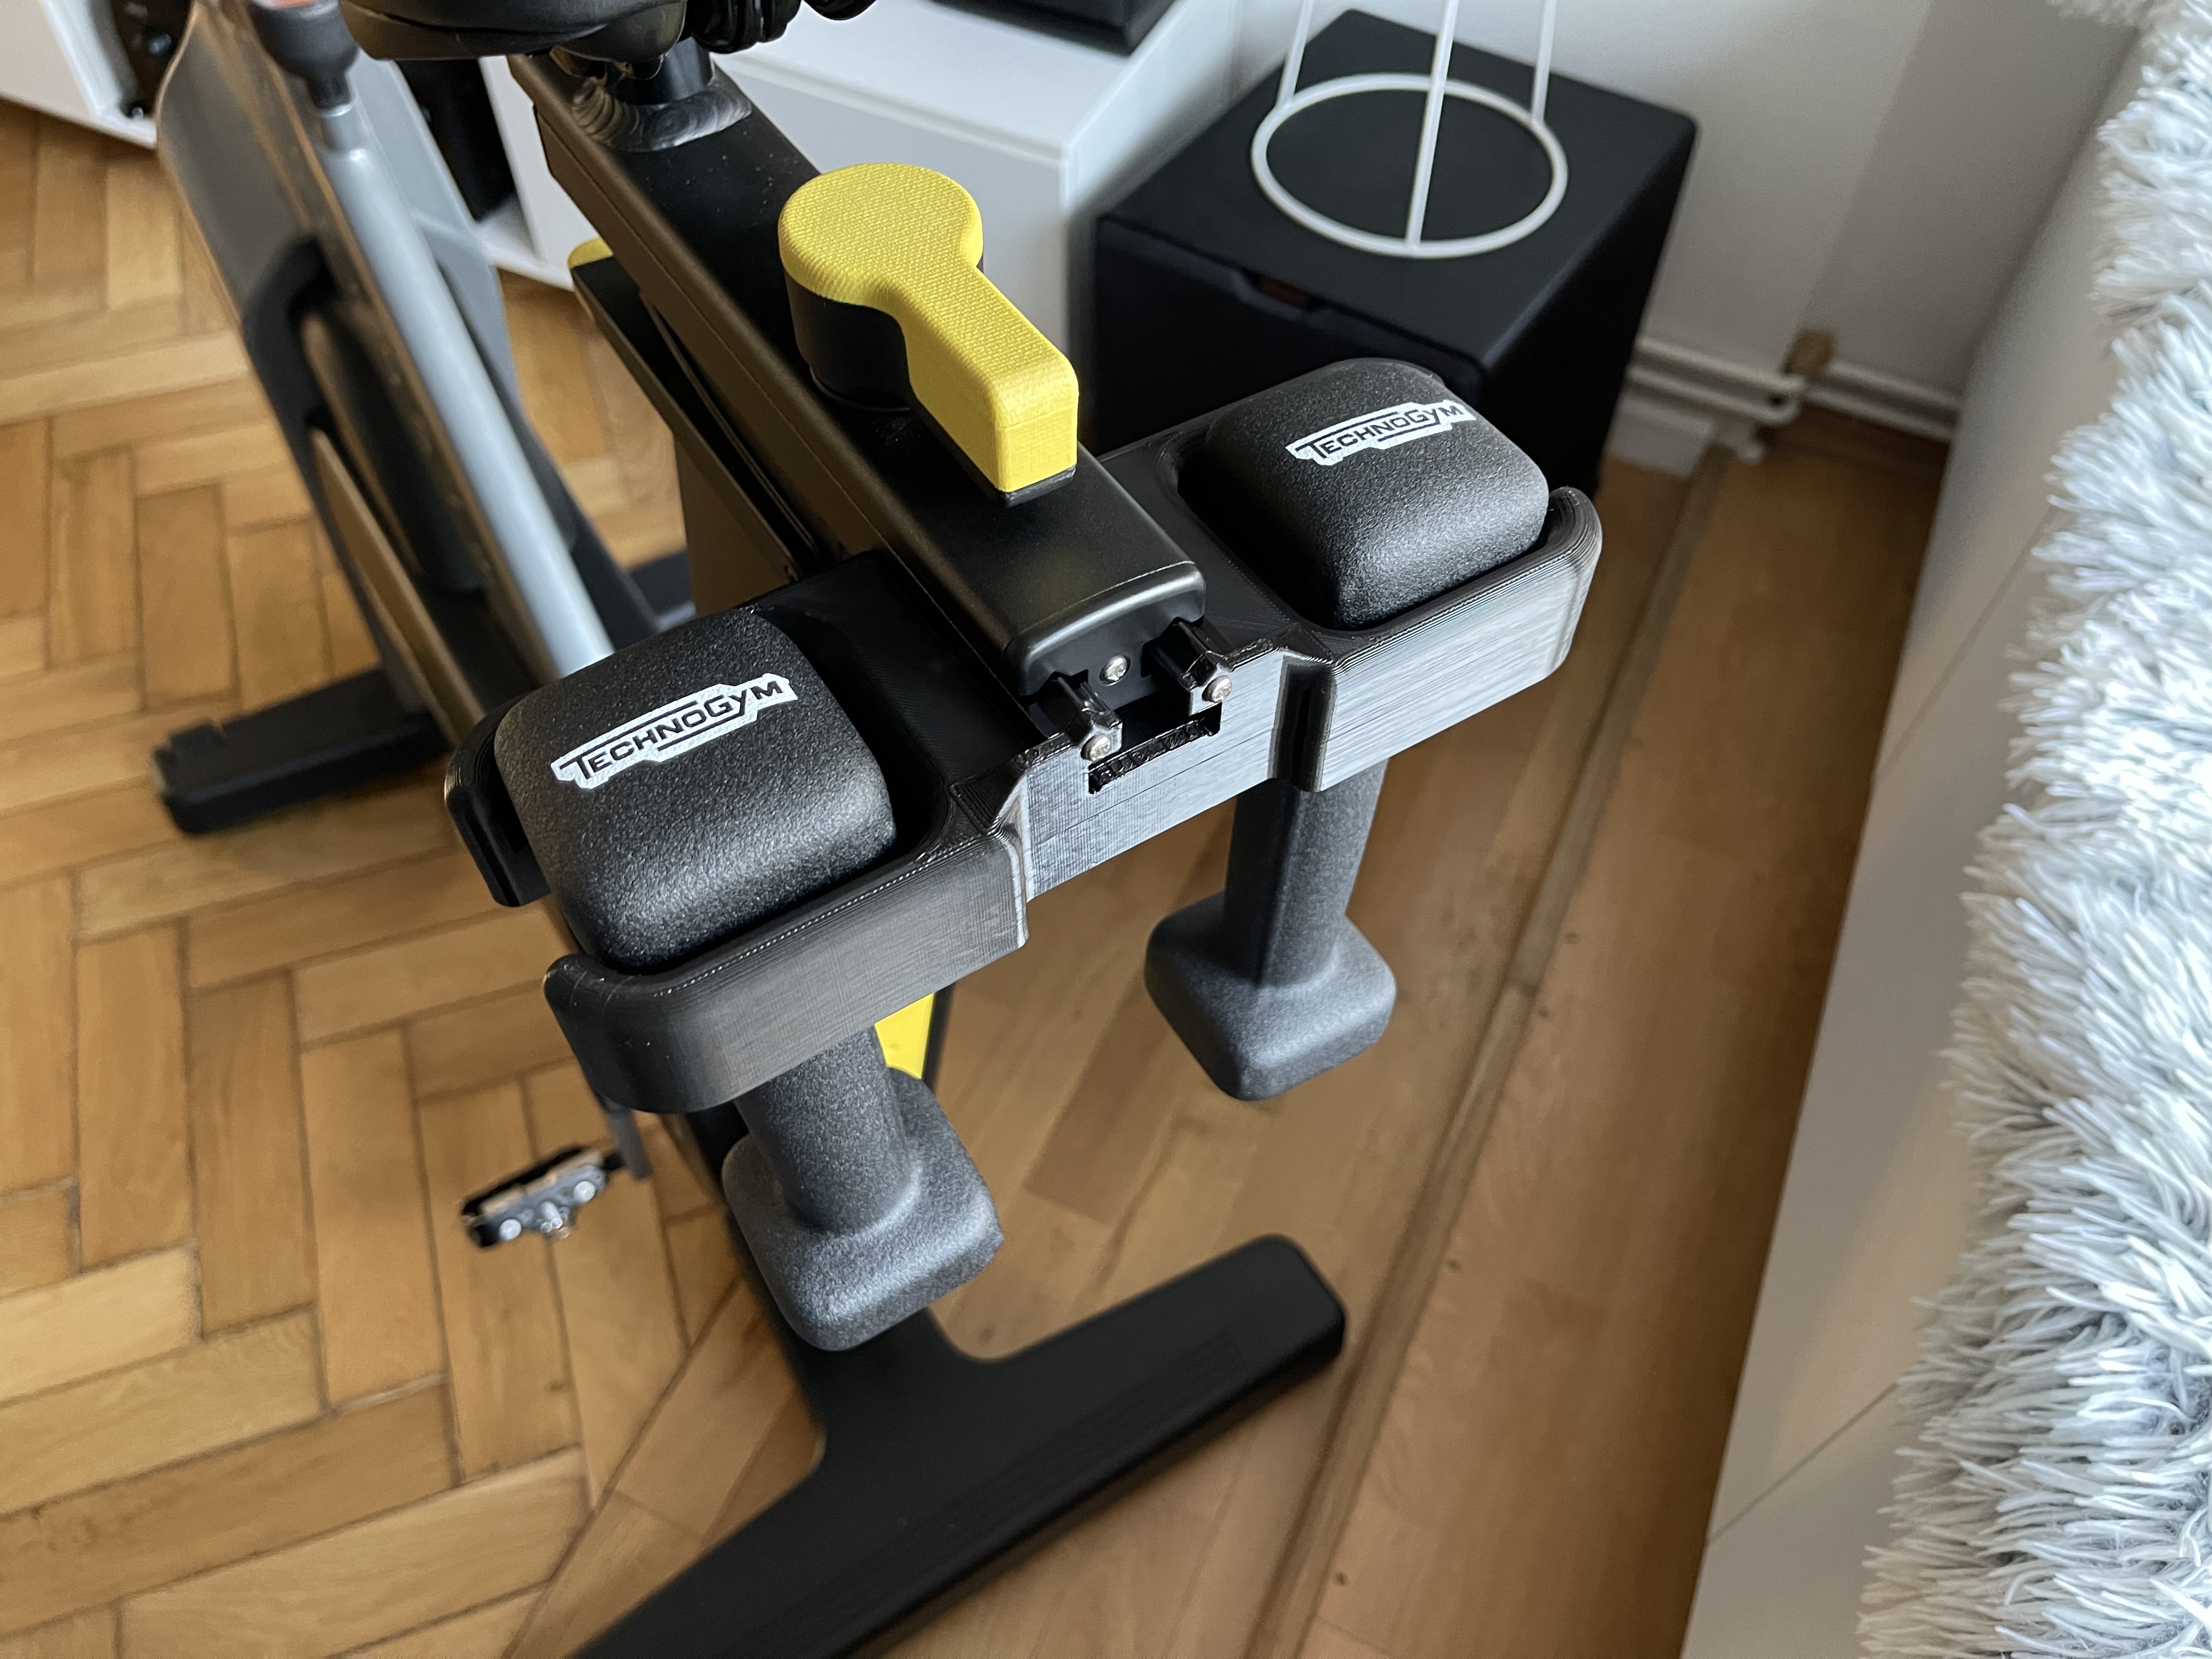 Technogym Bike Group Cycle weights ( dumbbell ) holder